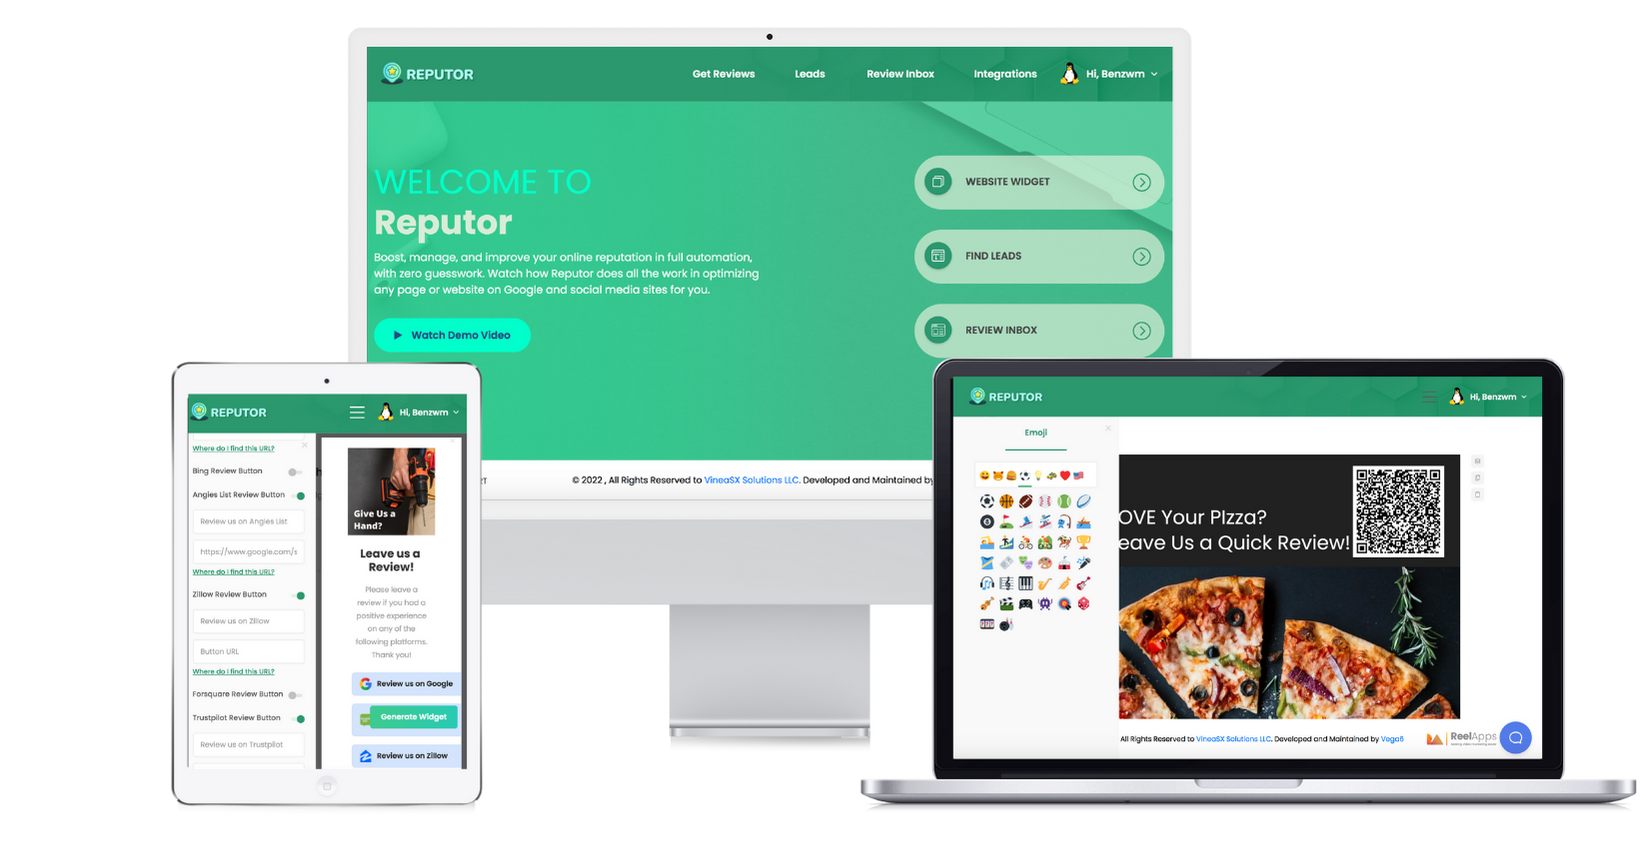 Reputor Review – Best #1 Reputation Management & Enhancement App Finds, Claims, and Optimizes Local Business Profile Pages on Autopilot!